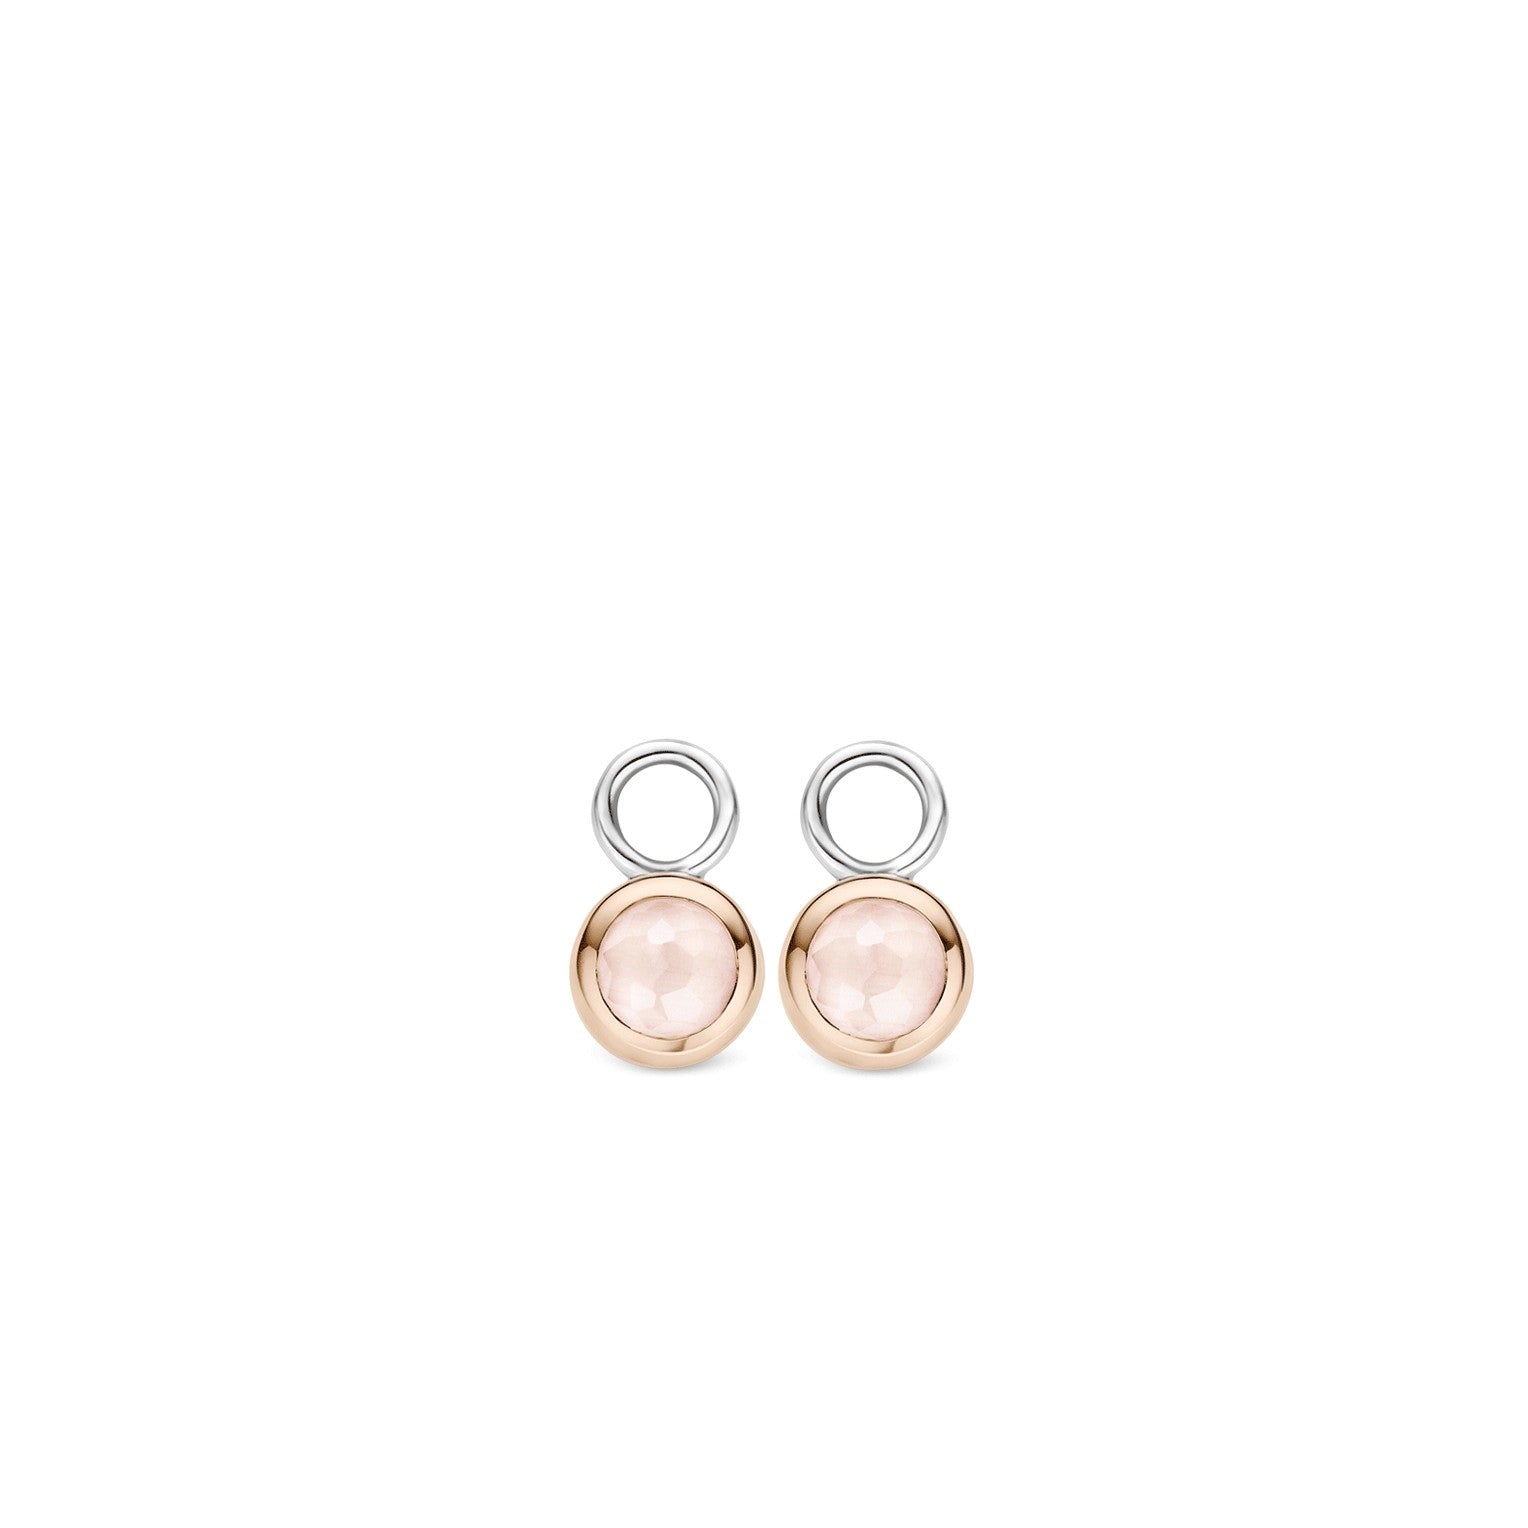 TI SENTO Sterling Silver Rose Tone Ear Charms with Bezel Set Round Pink Faceted Stones